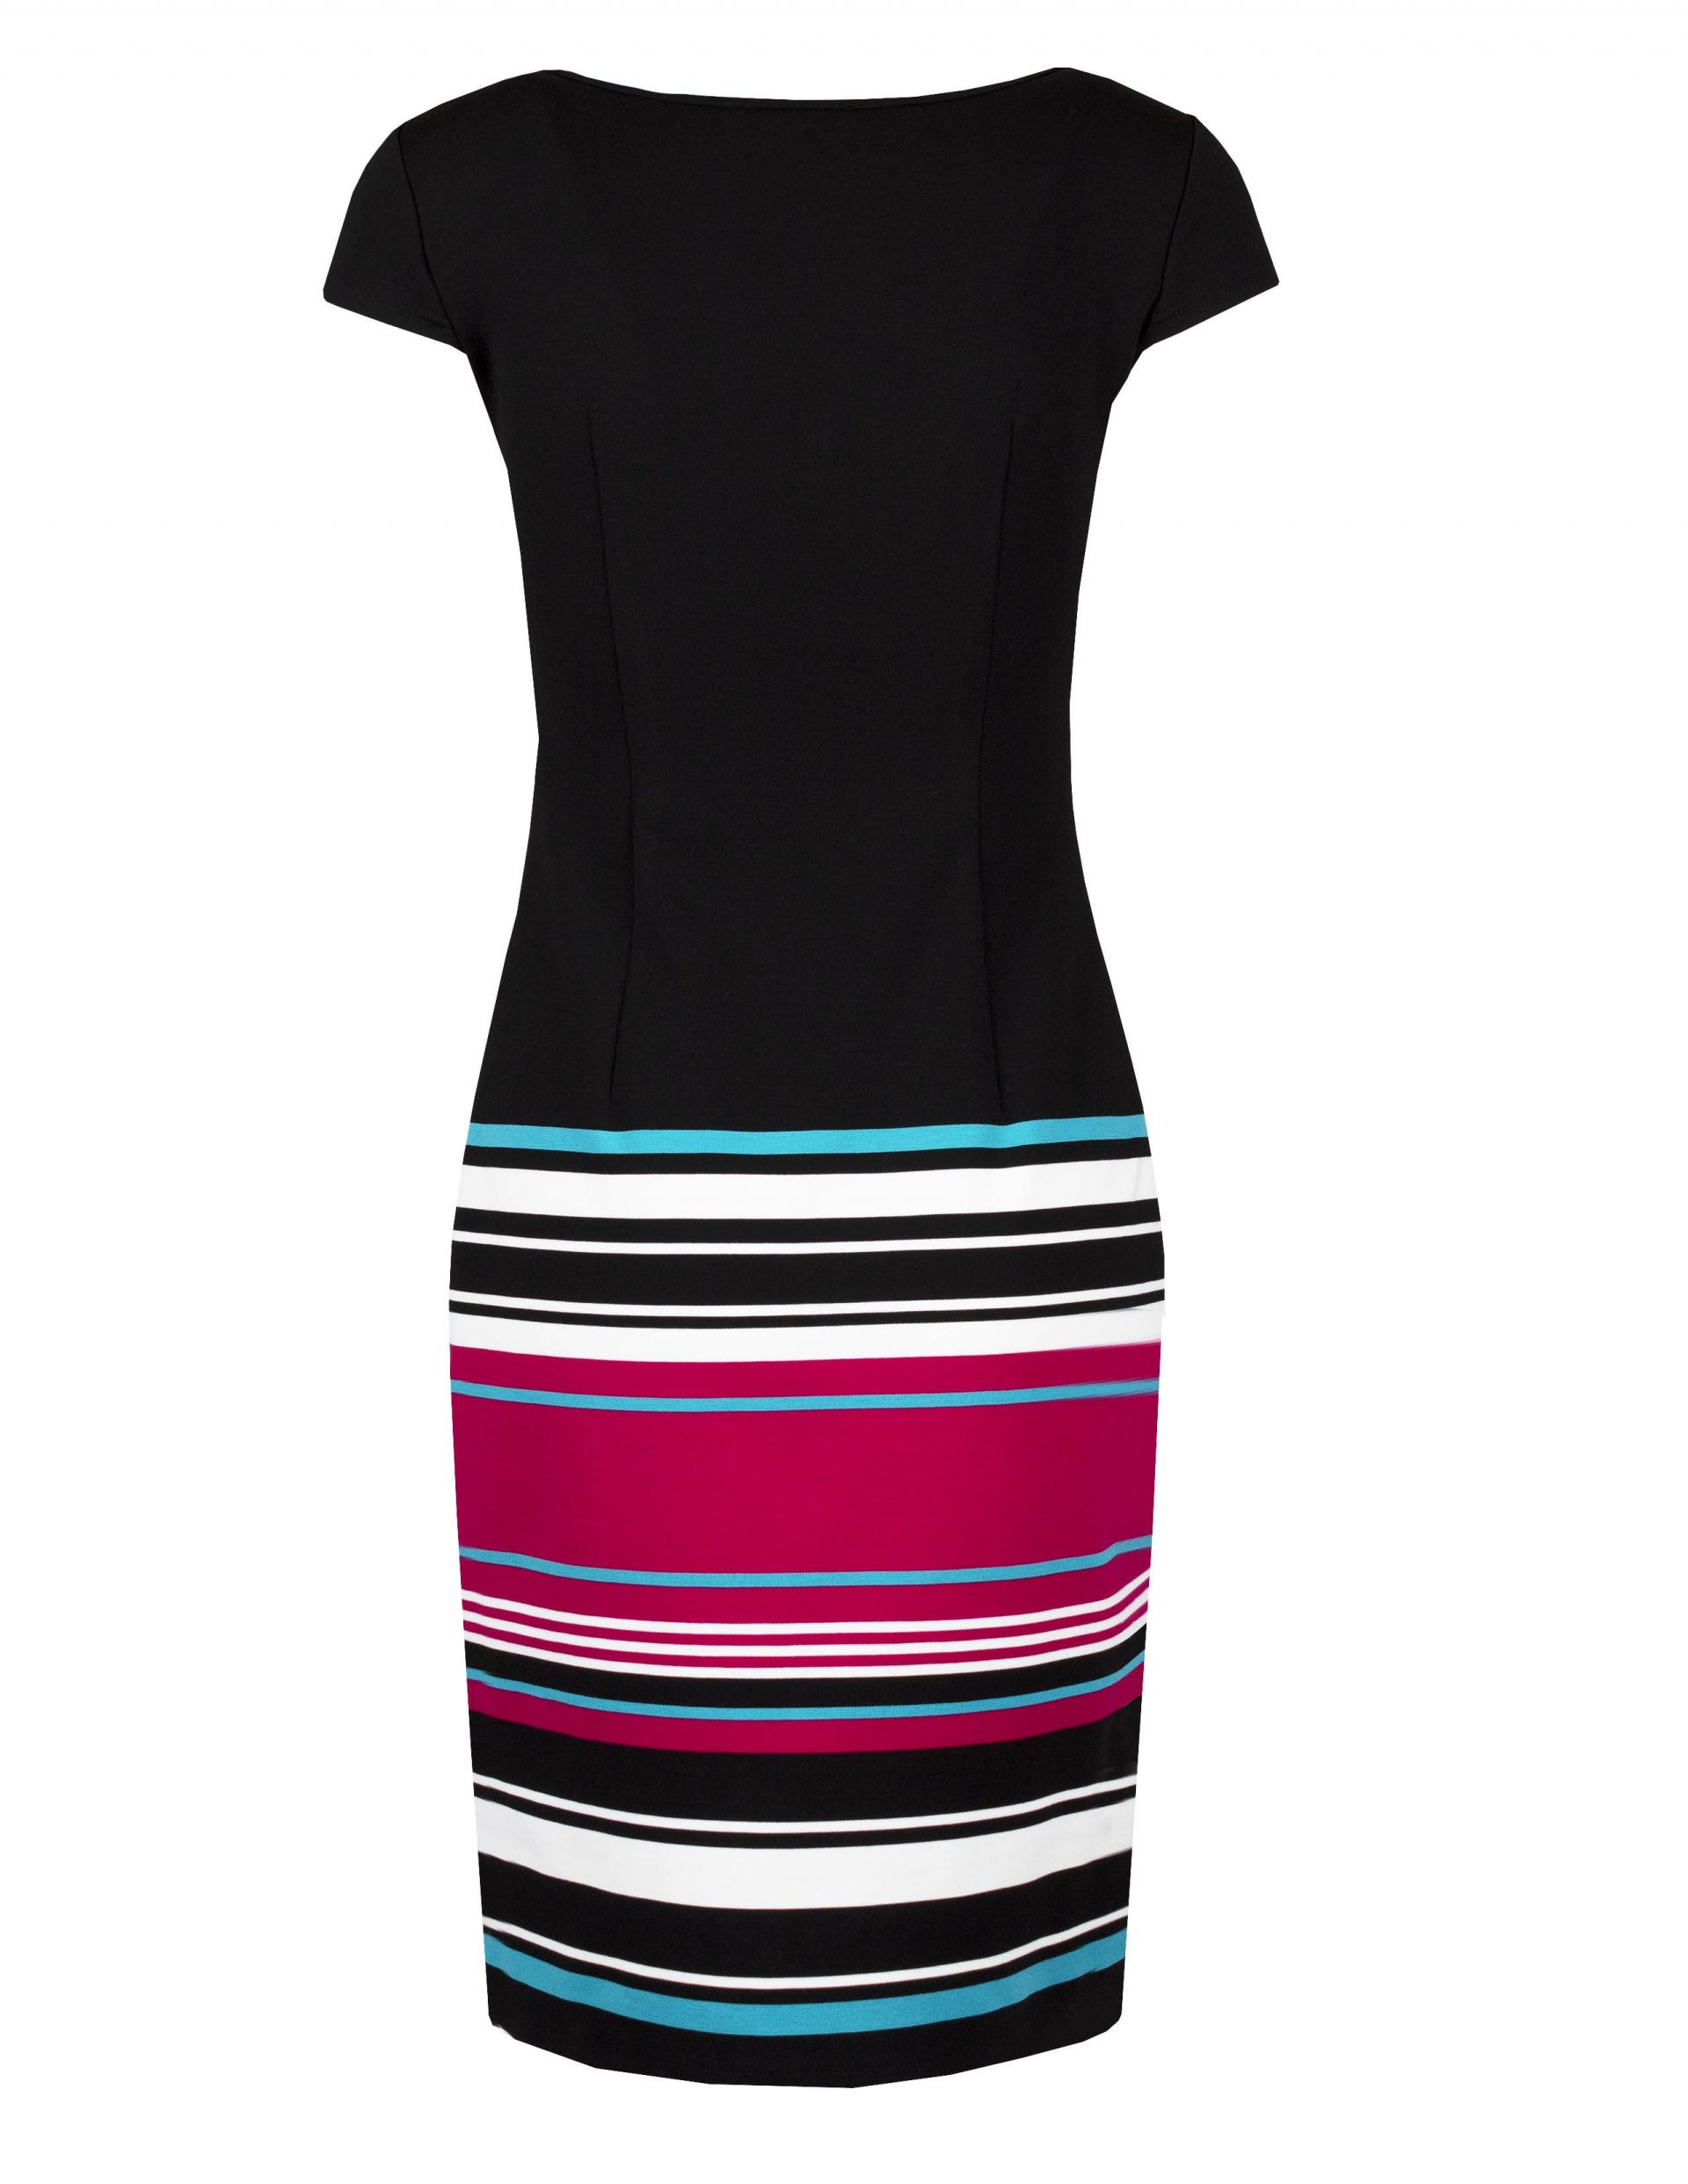 Bodycon short-sleeved dress with stripes print in the lower part 1